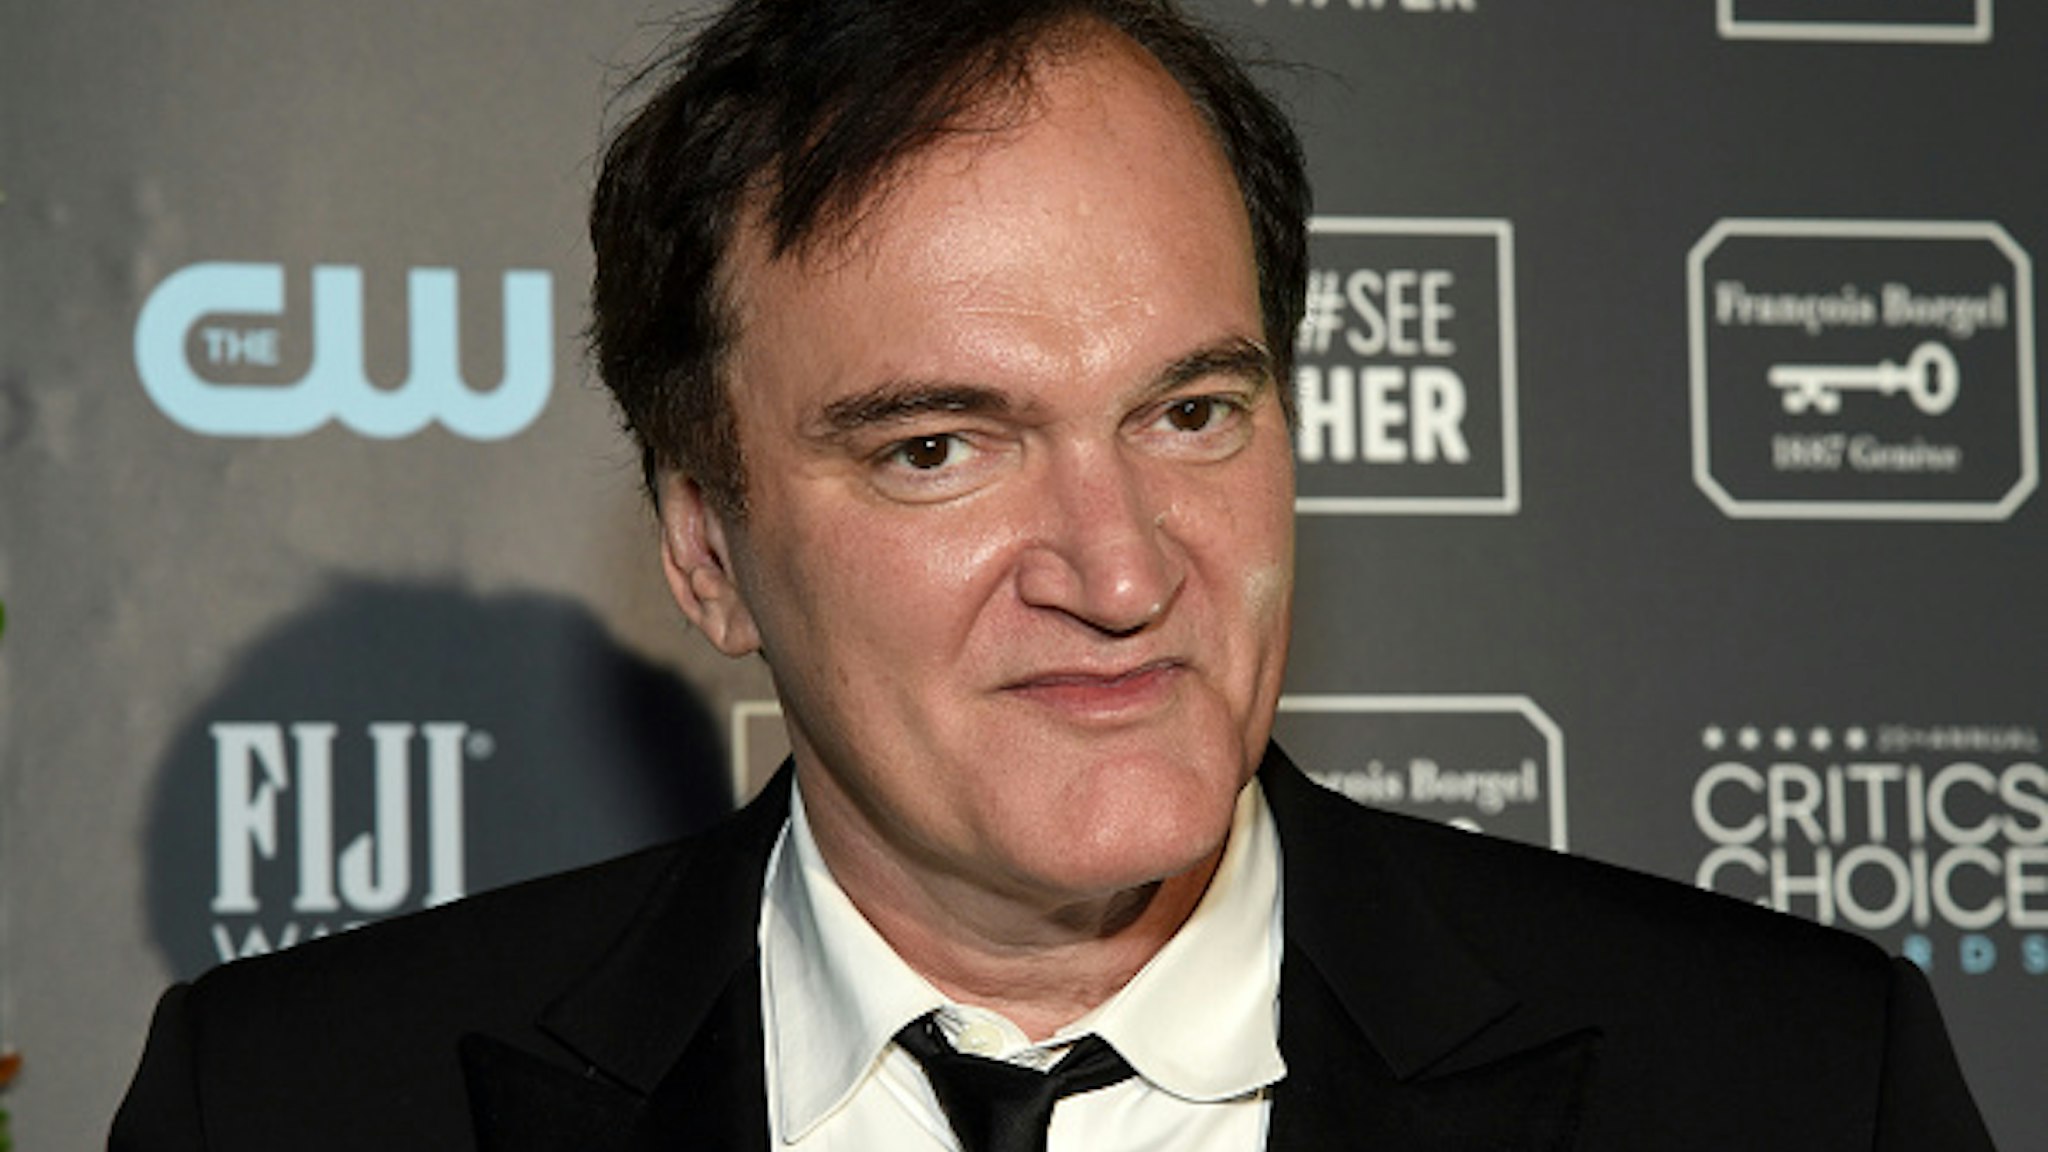 SANTA MONICA, CALIFORNIA - JANUARY 12: Quentin Tarantino, winner of Best Picture for 'Once Upon a Time in Hollywood', attends the 25th Annual Critics' Choice Awards at Barker Hangar on January 12, 2020 in Santa Monica, California.